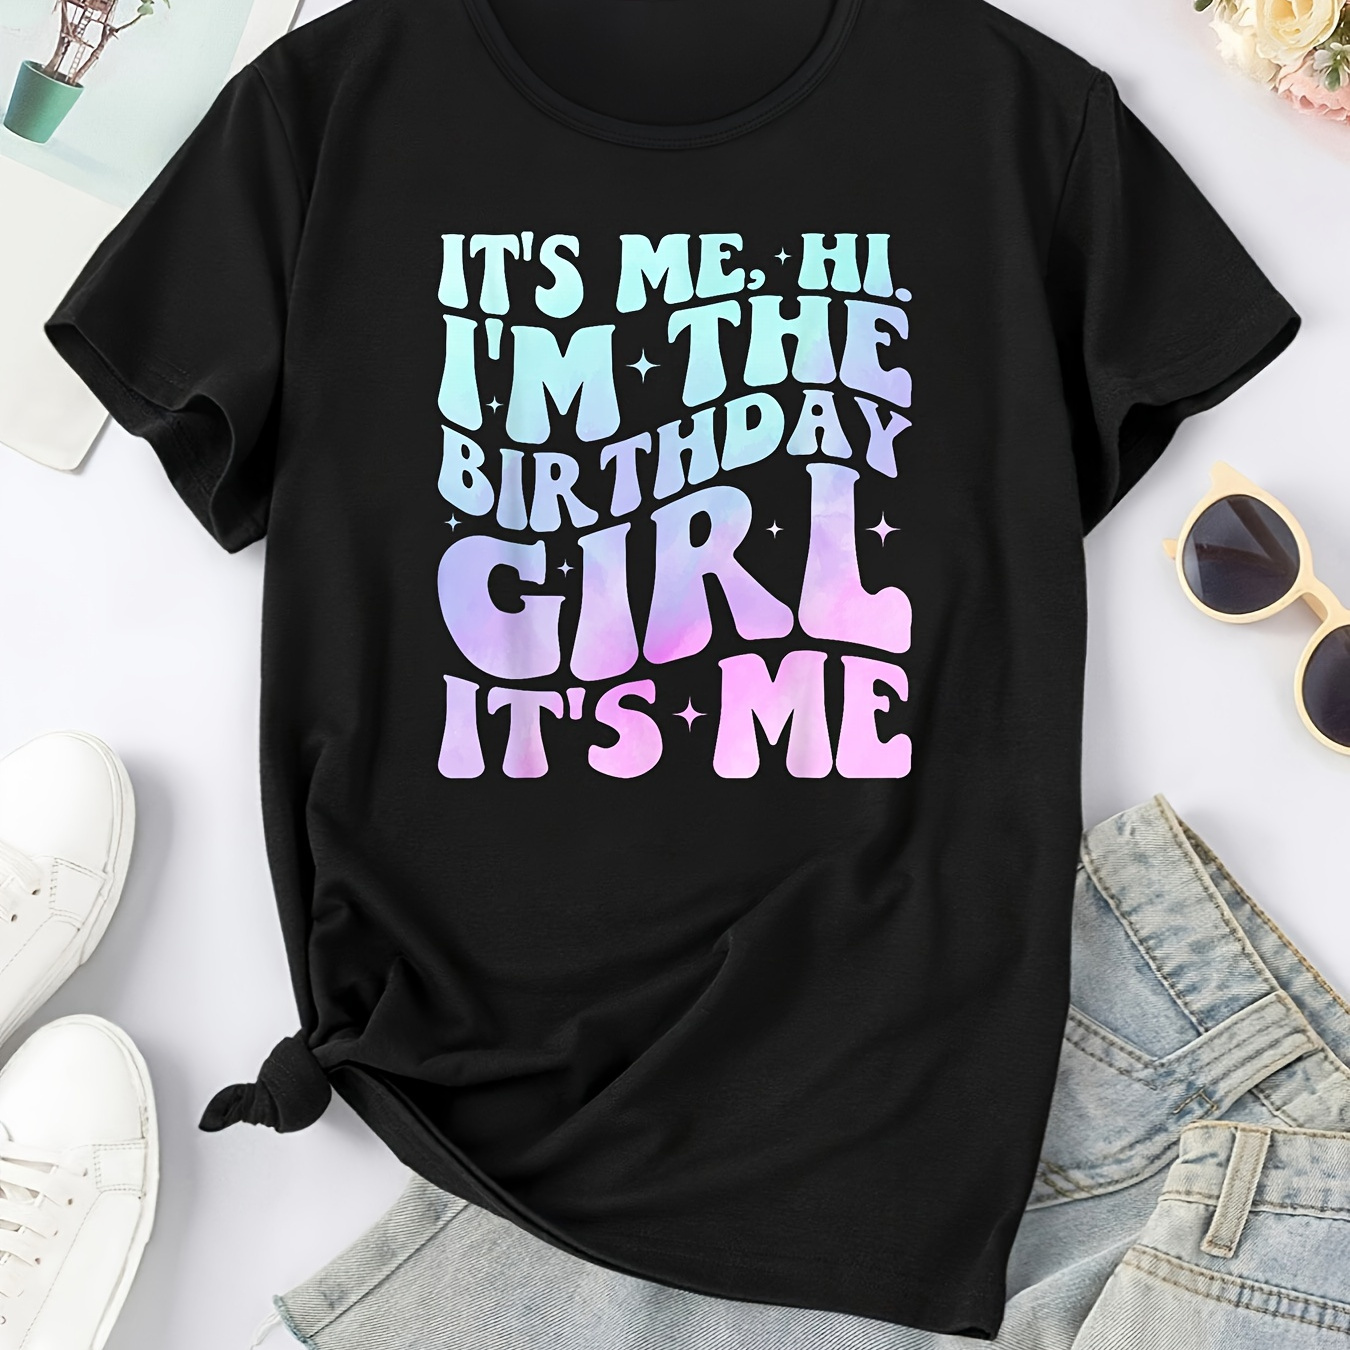 

Tt'sthe Birthday Gradient Letter Print Sports Tee, Short Sleeves Round Neck Casual Workout T-shirt Top, Women's Activewear